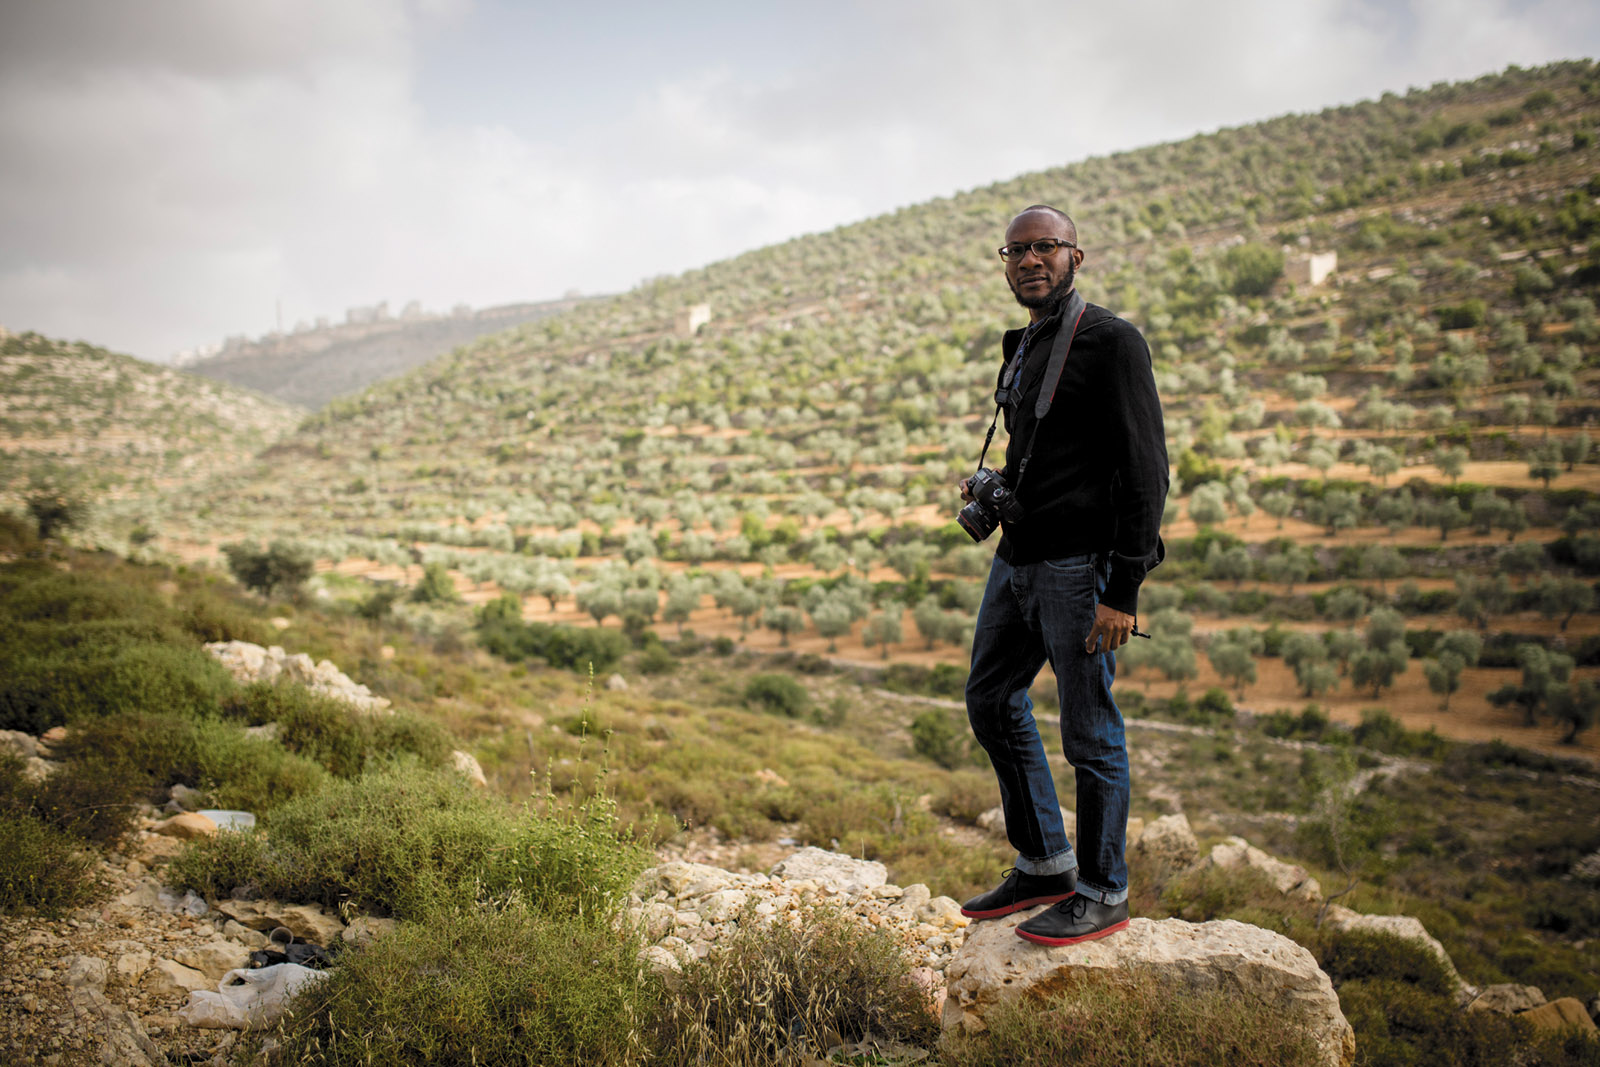 Teju Cole on the outskirts of Ramallah during the Palestine Festival of Literature, June 2014